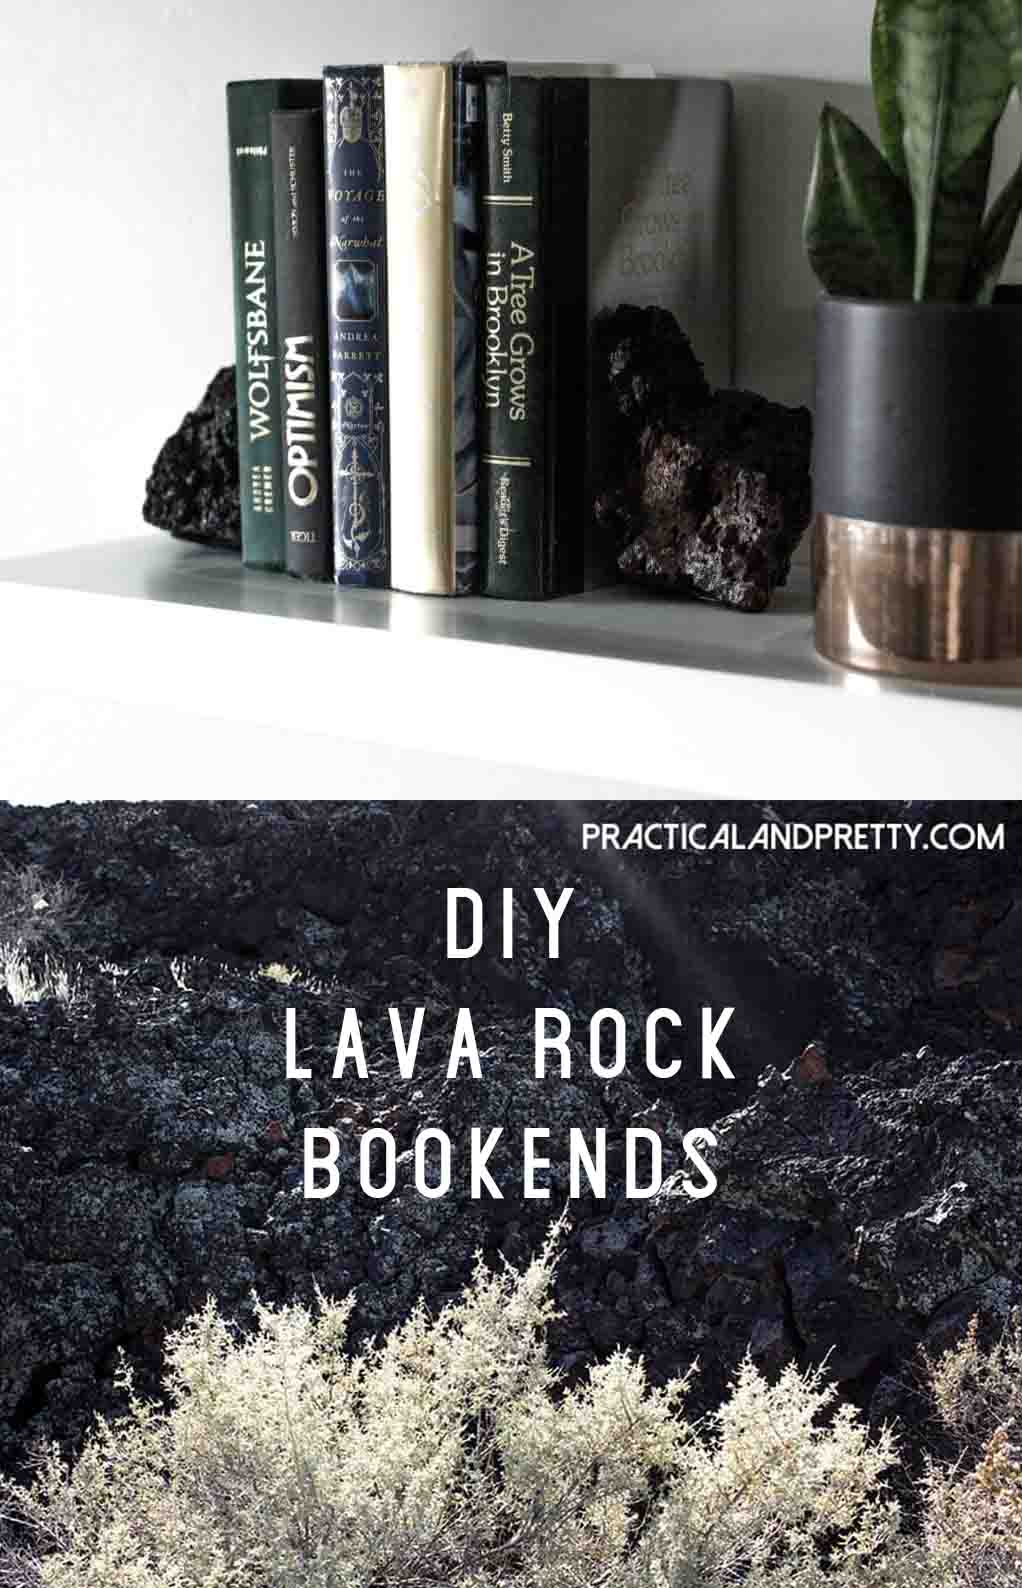 These lava rock bookends let you bring a little bit of the beautiful desert landscape right into your home. And they're so easy!